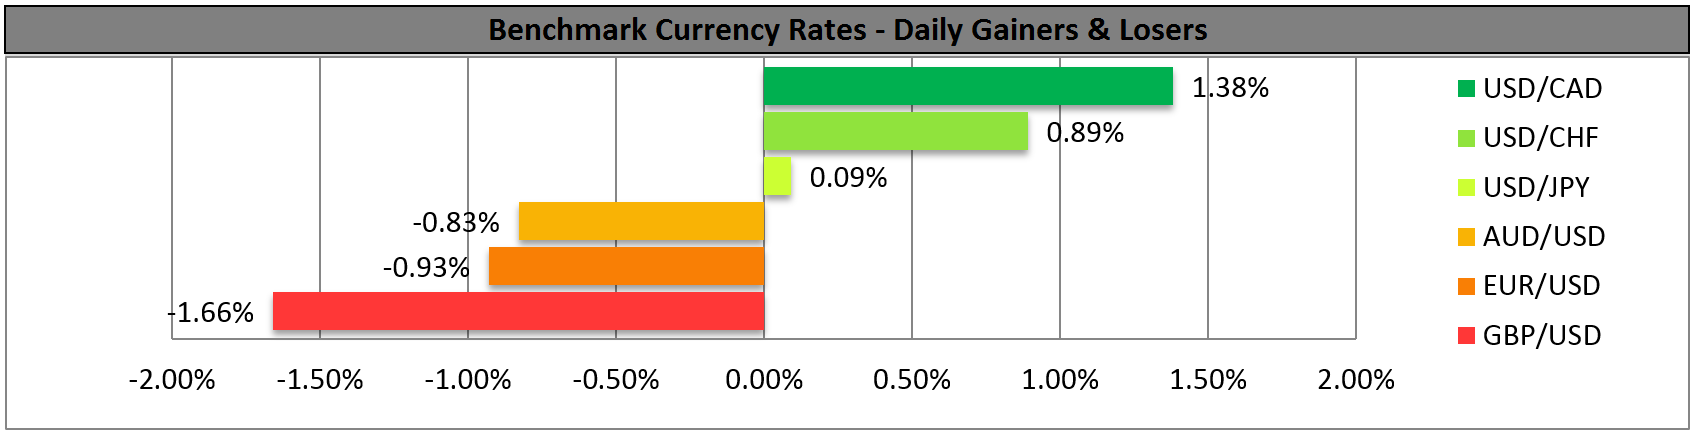 Benchmark Currency Rates-Daily Gainers & Losers